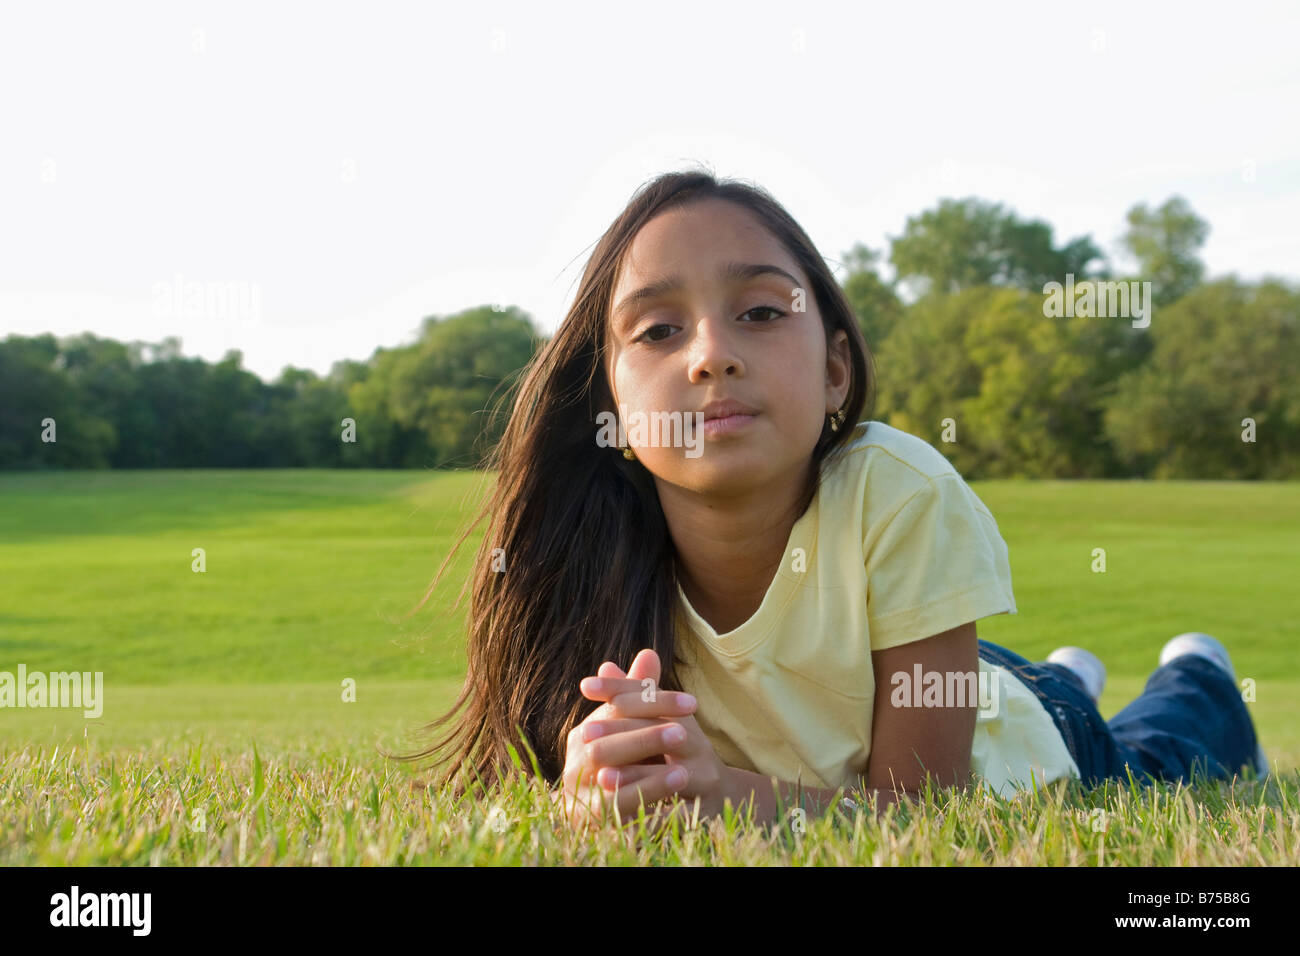 8 year old girl lying on grass in park, Winnipeg, Canada Banque D'Images